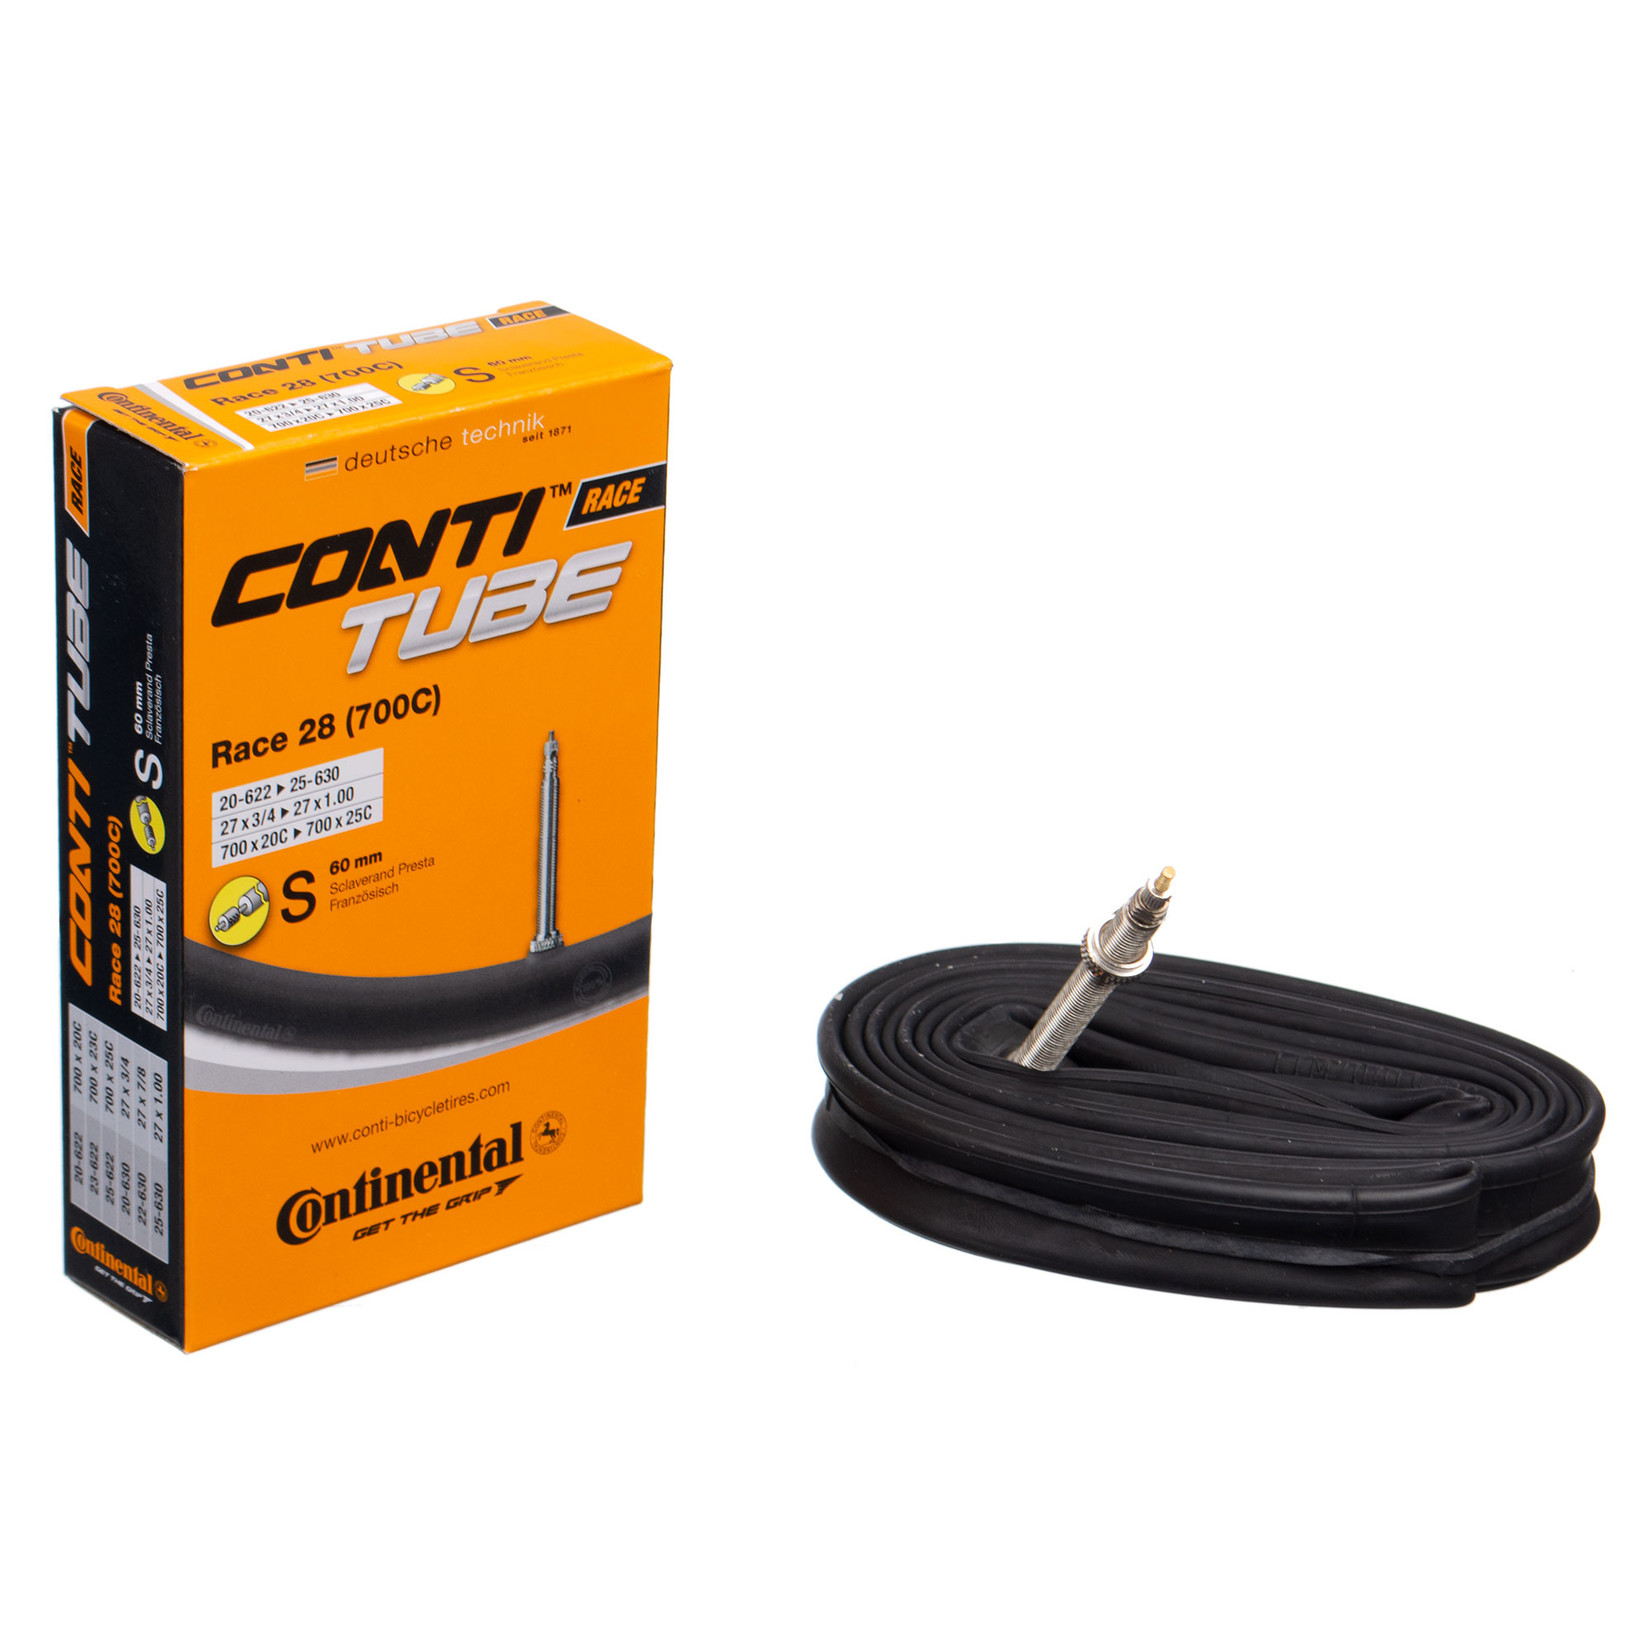 Continental Continental Tube, 700x20-25c 60mm